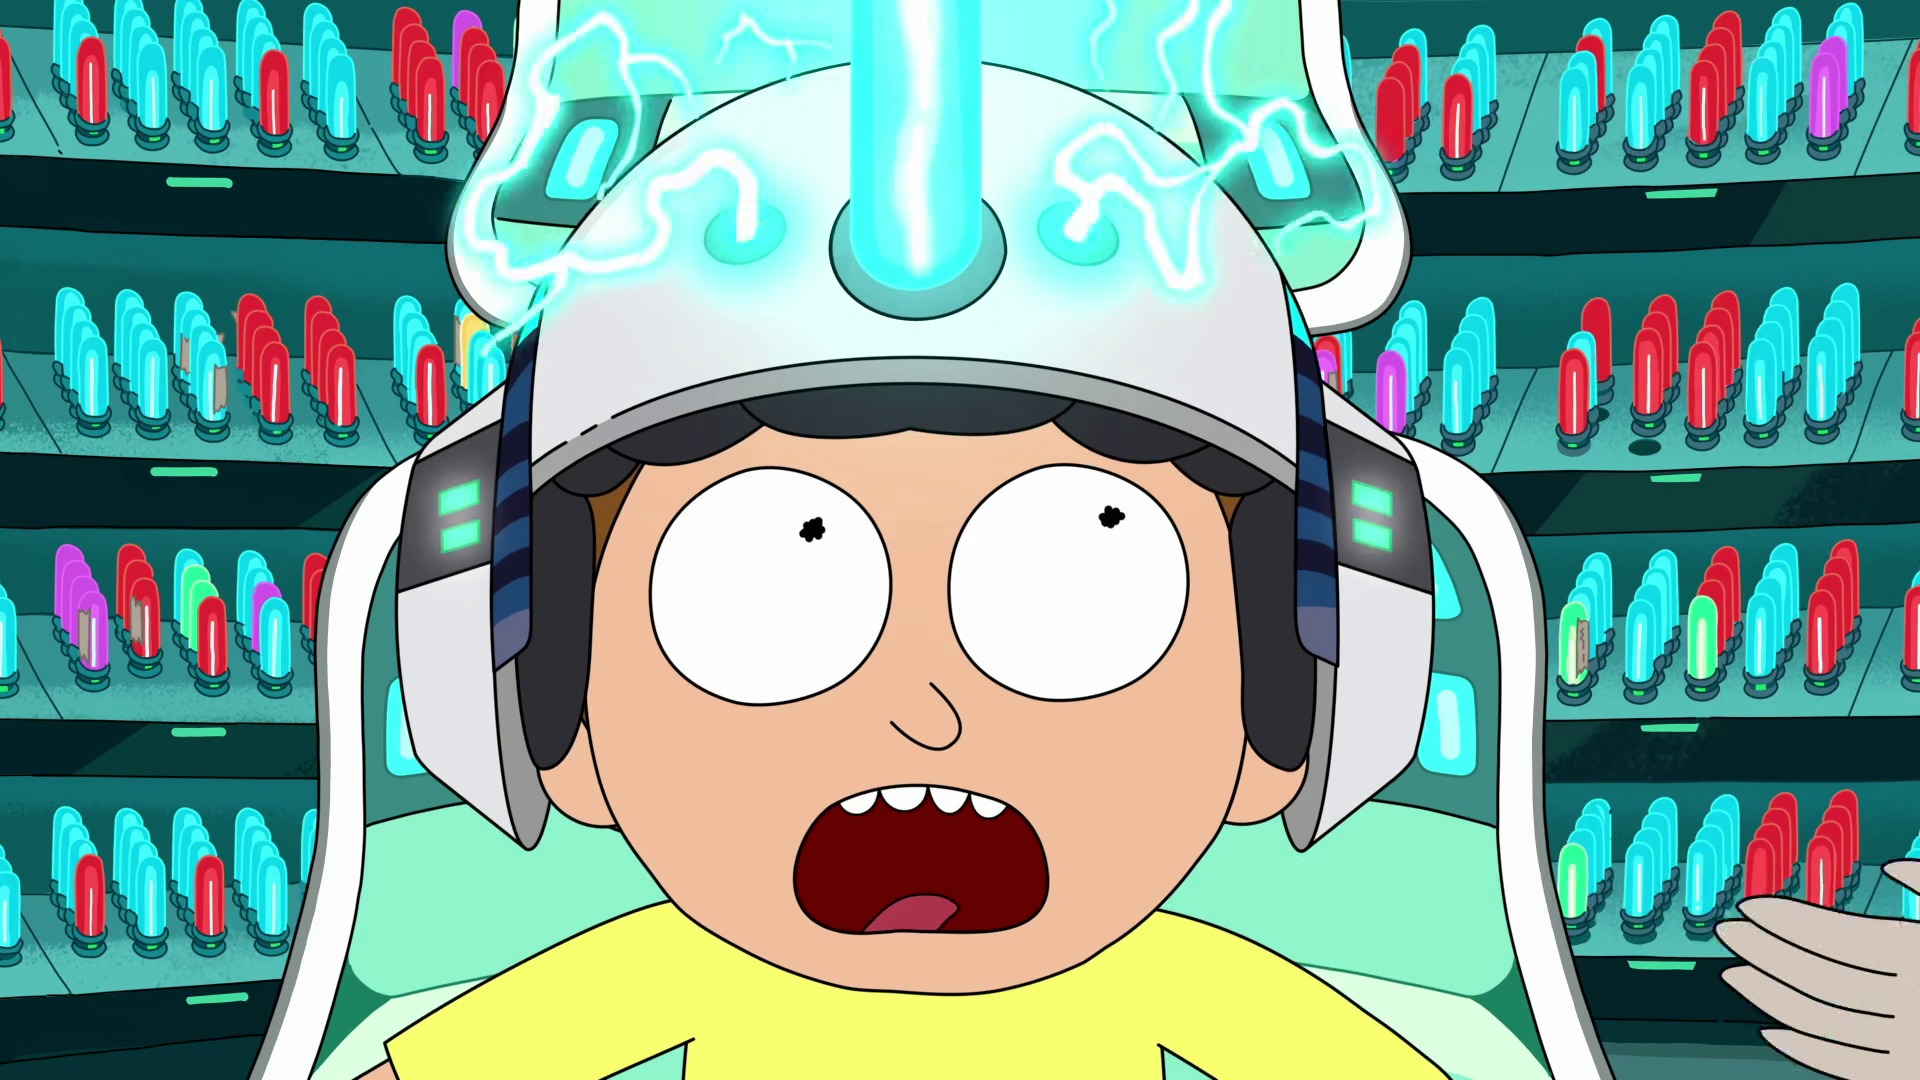 rick and morty season 4 Release Date